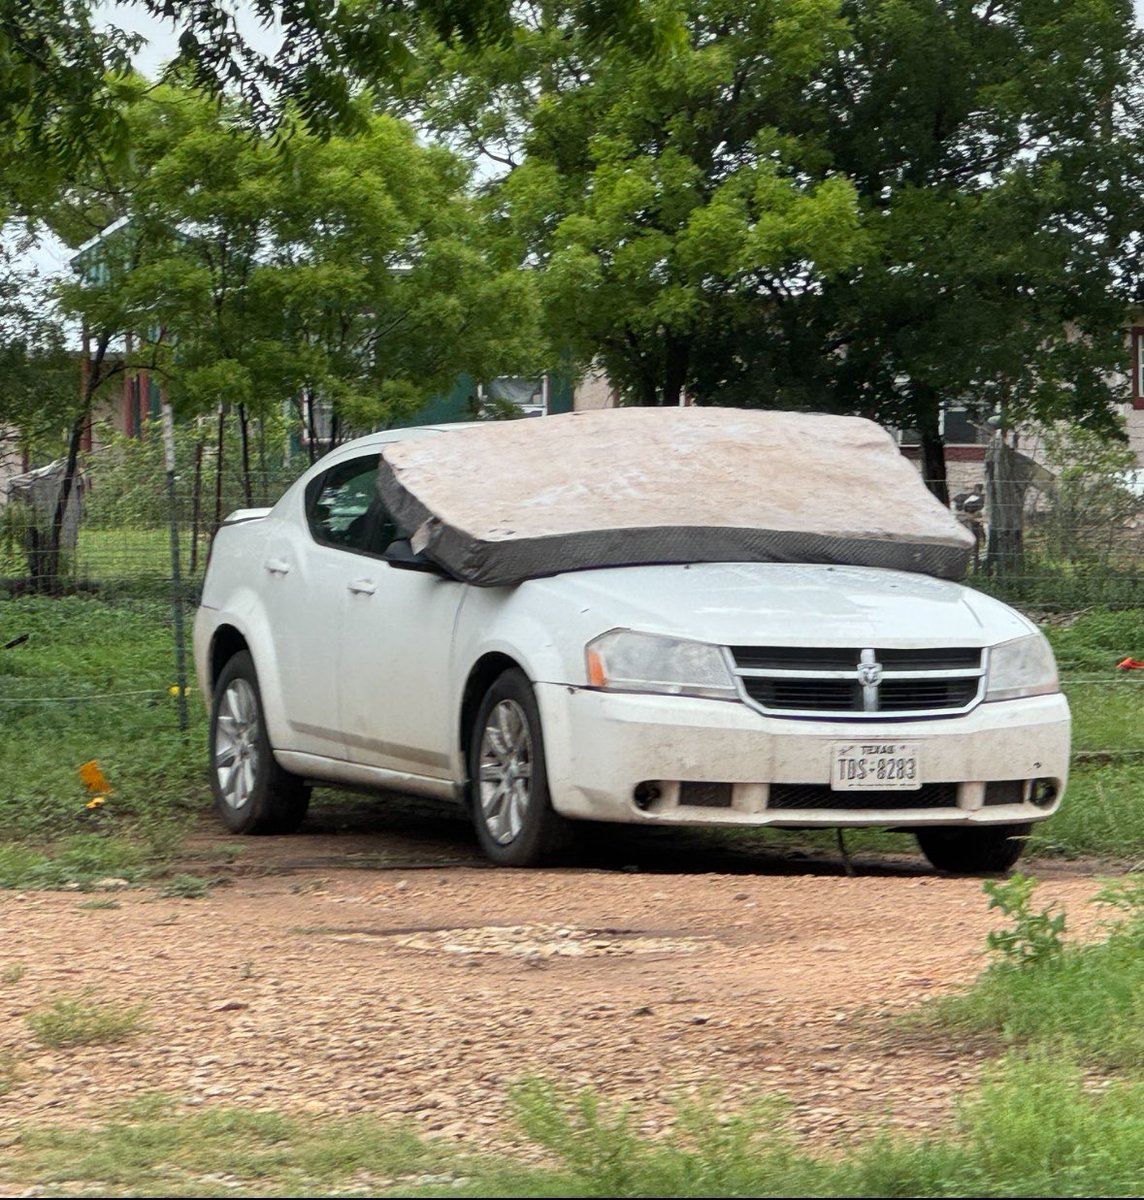 That’s one way to protect your windshield from hail.